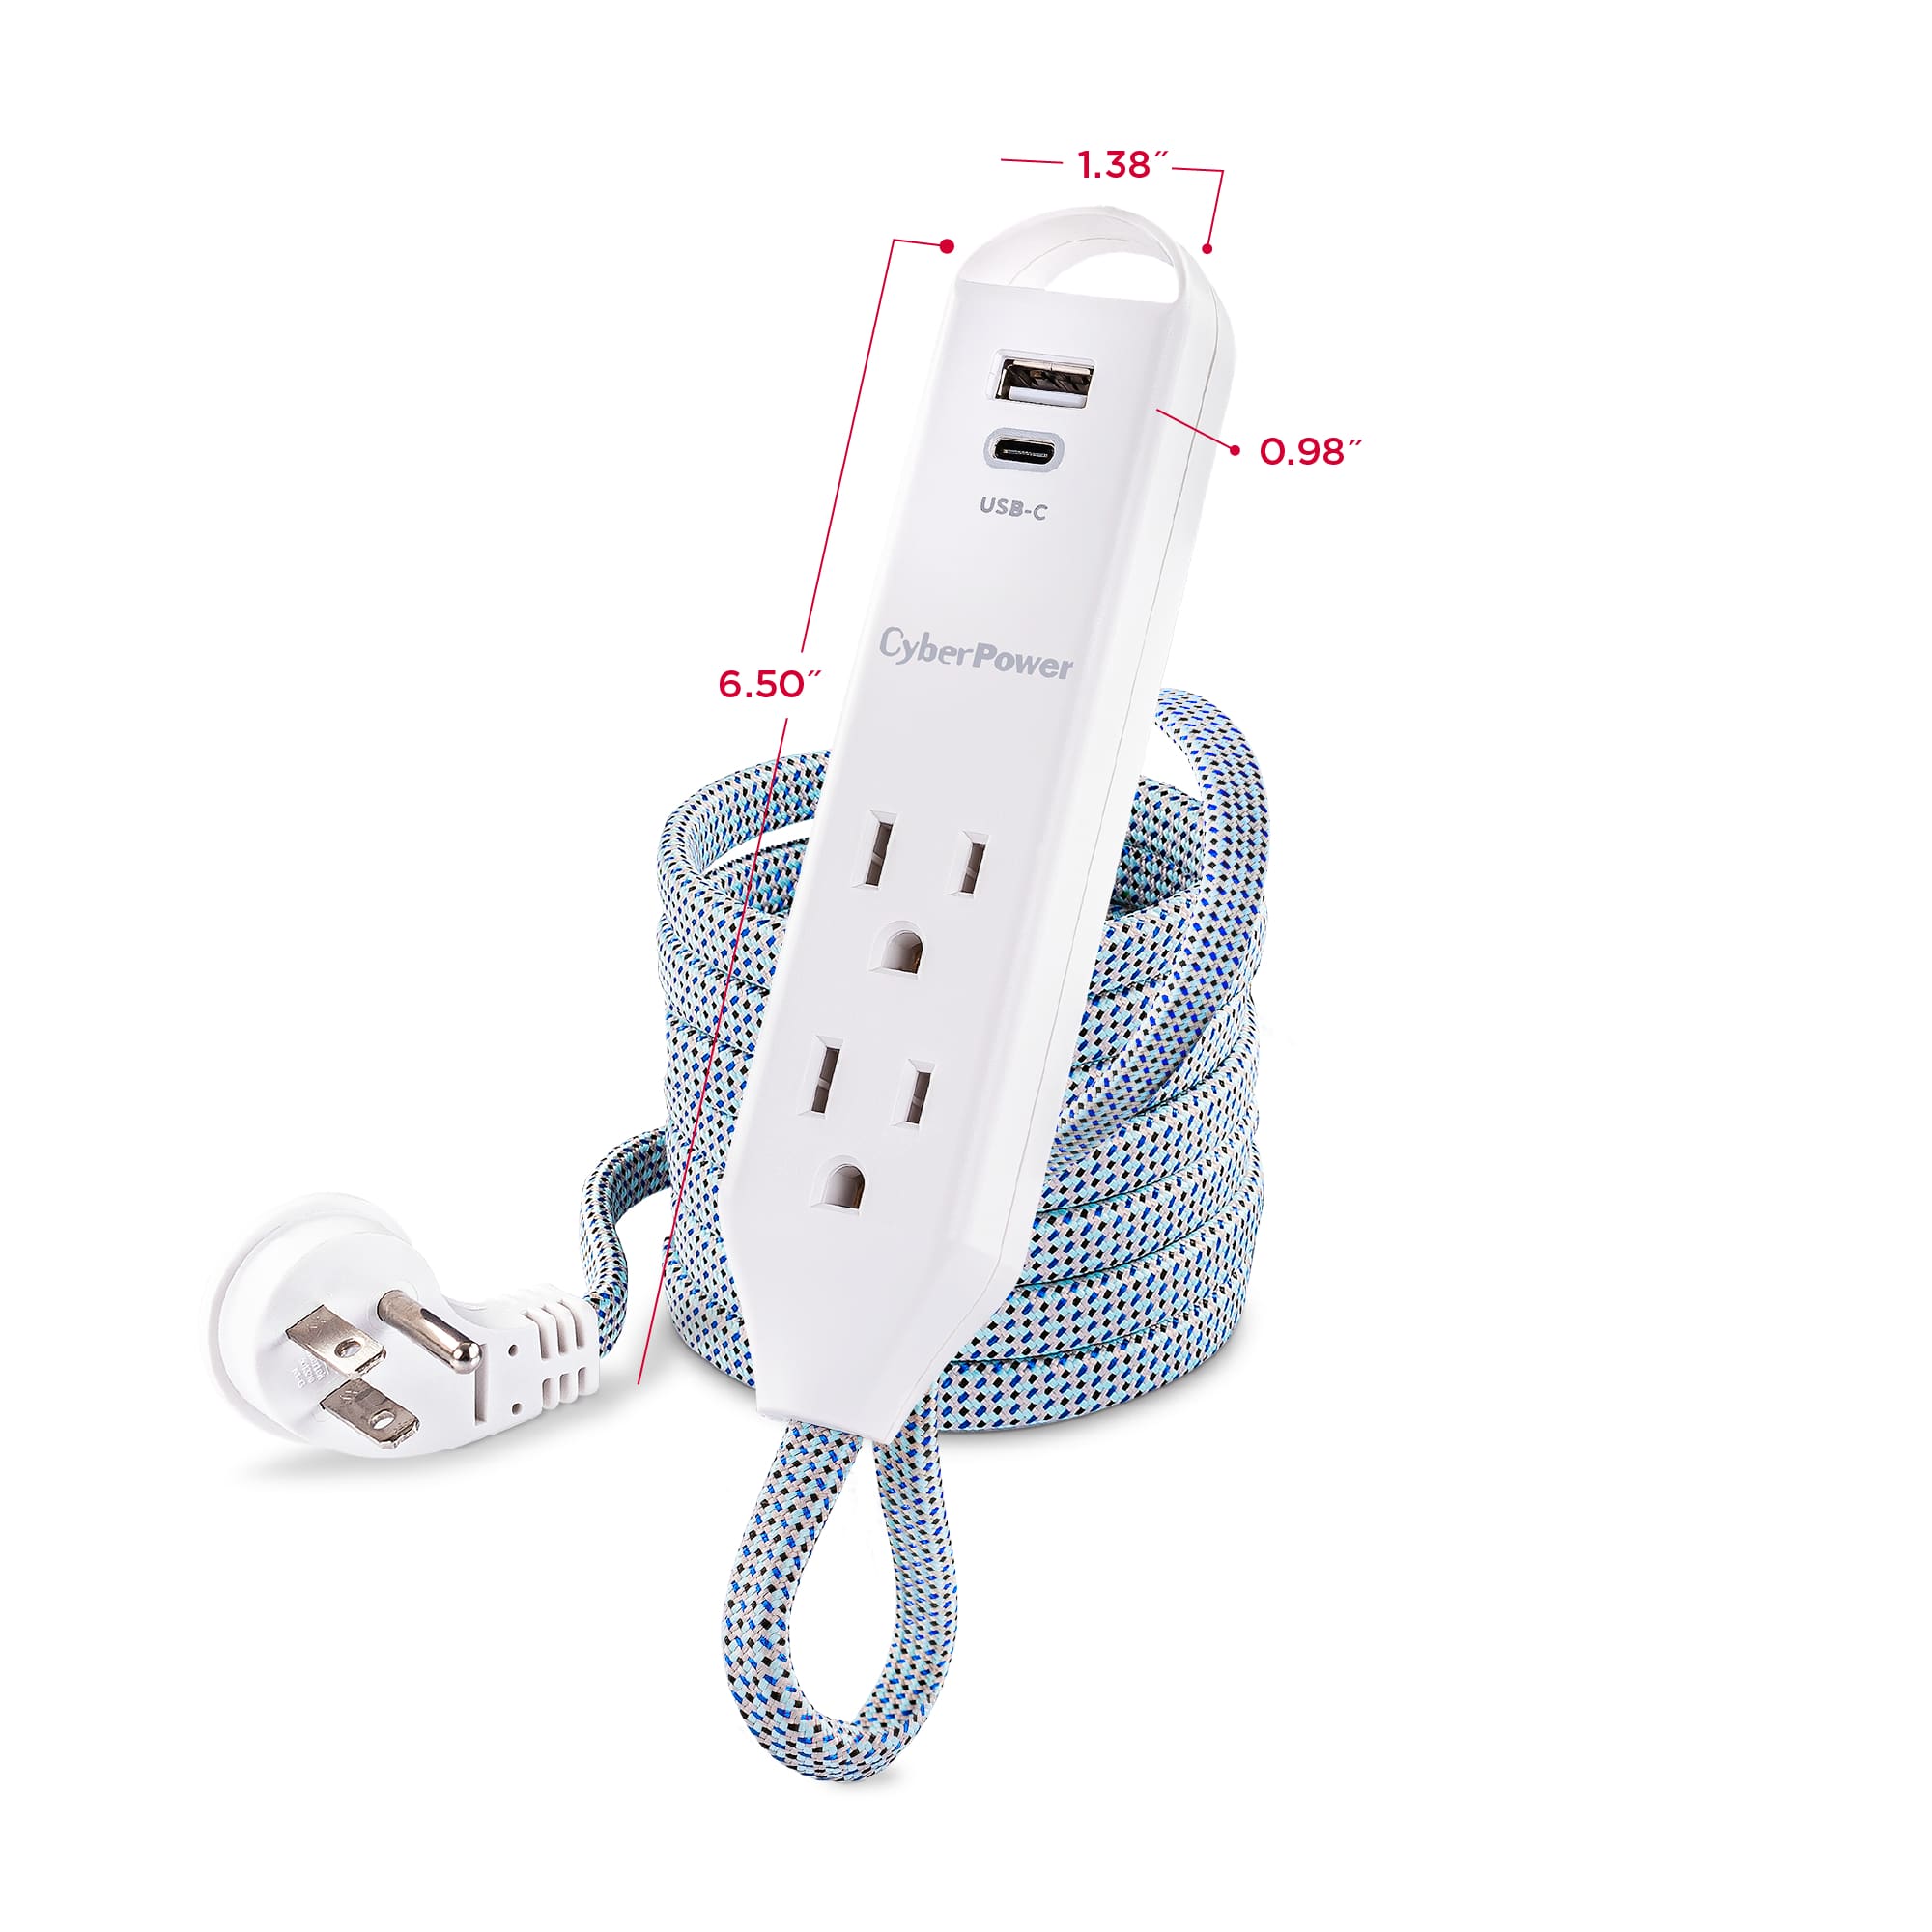 CyberPower GC305UCB 3 Outlet Ext Cord Surge with USB - image 3 of 9